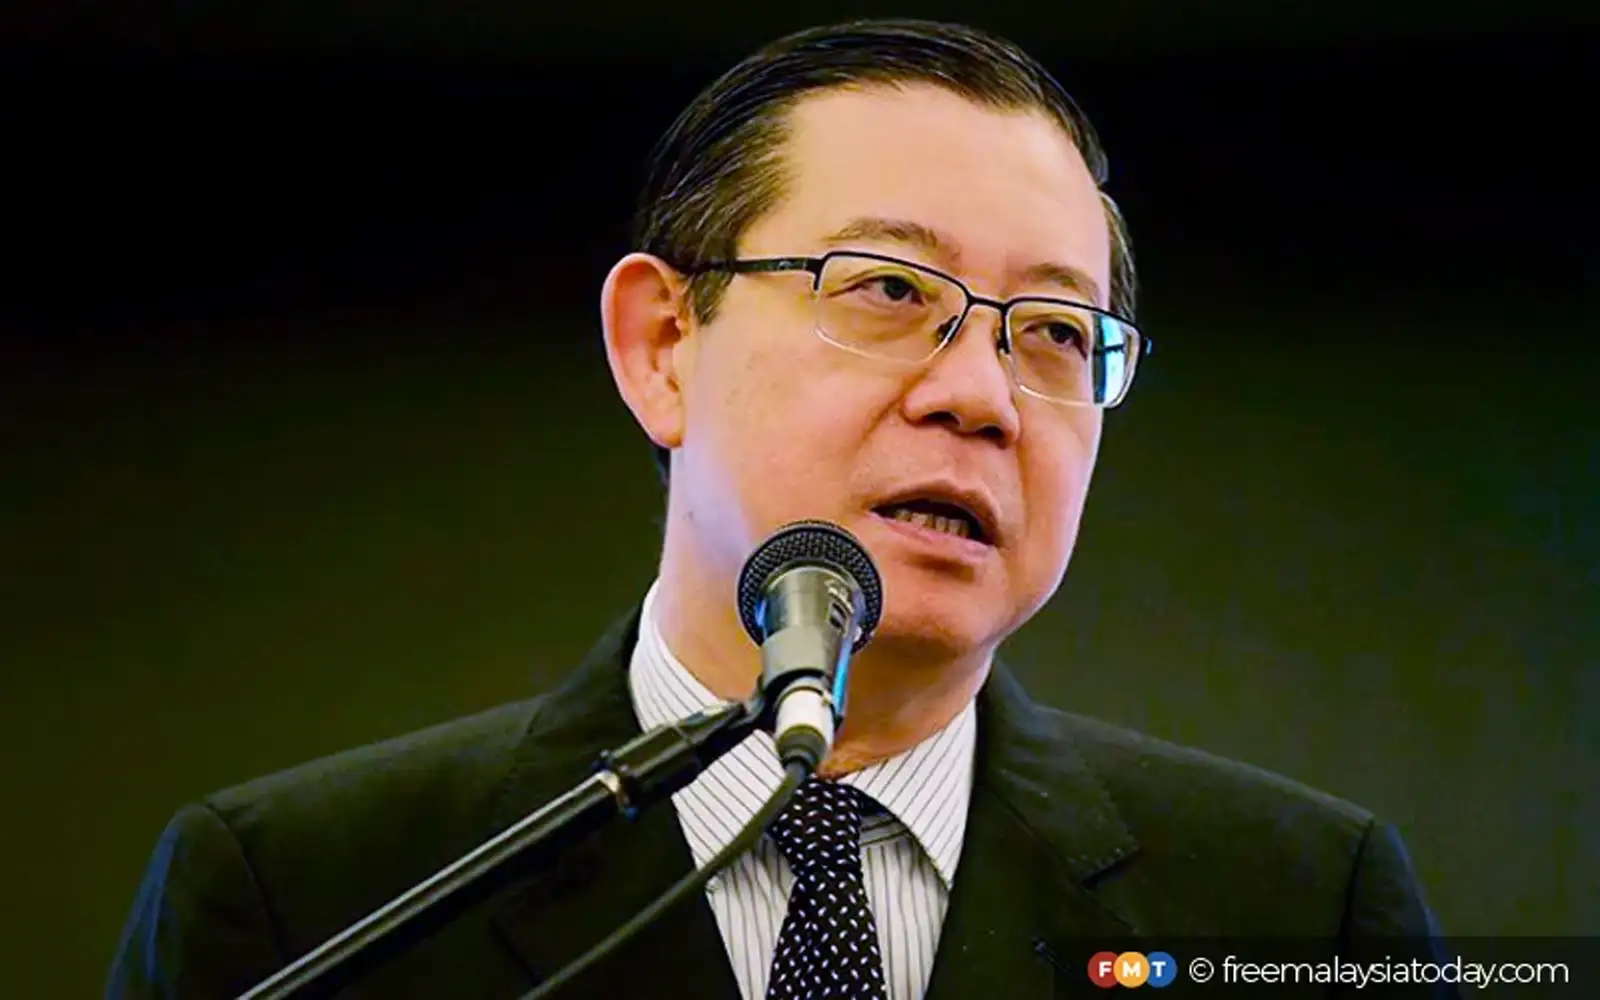 Make banks, telcos share responsibility for scam losses, says Guan Eng